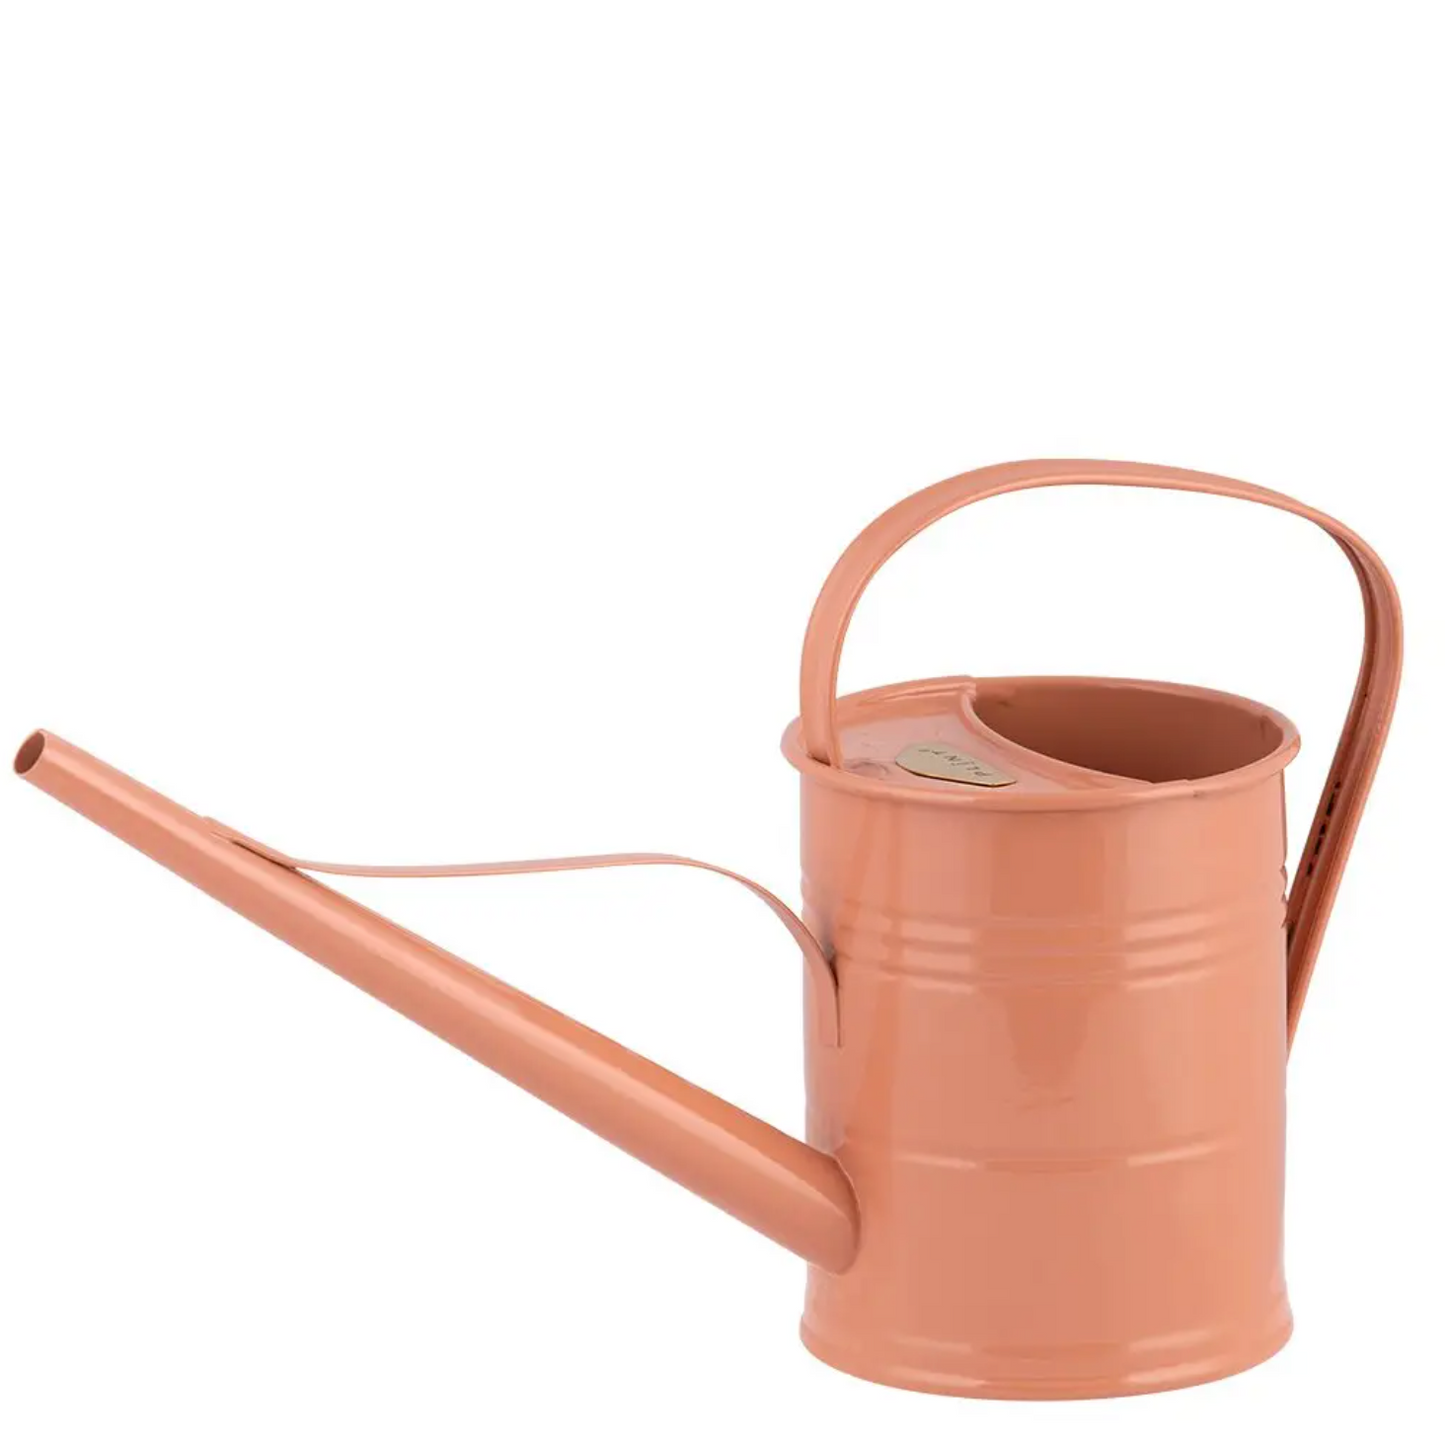 Watering Cans